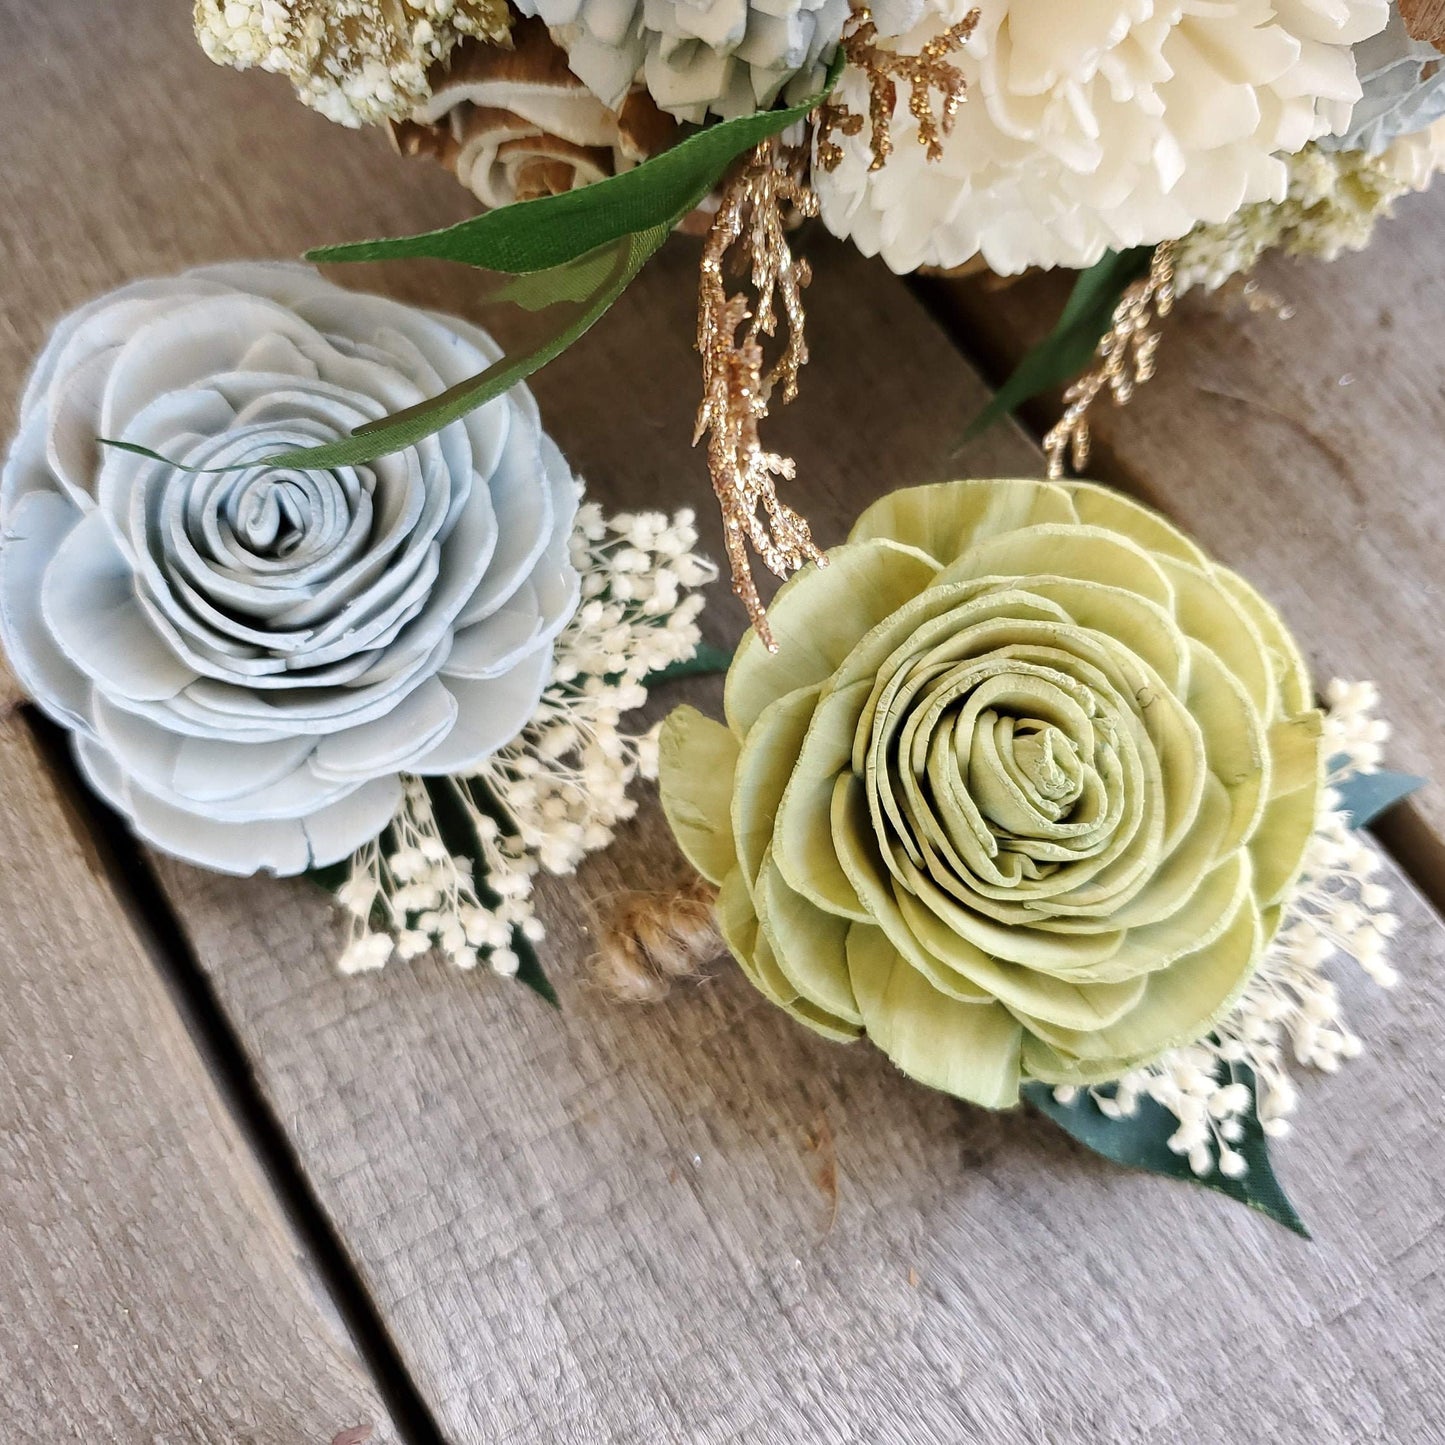 Groom Boutonniere with Wood Flower, Wooden Boutonniere, Groomsmen Pinned Flower for Wedding, Father of the Bride Lapel Pin, Pinned Corsage